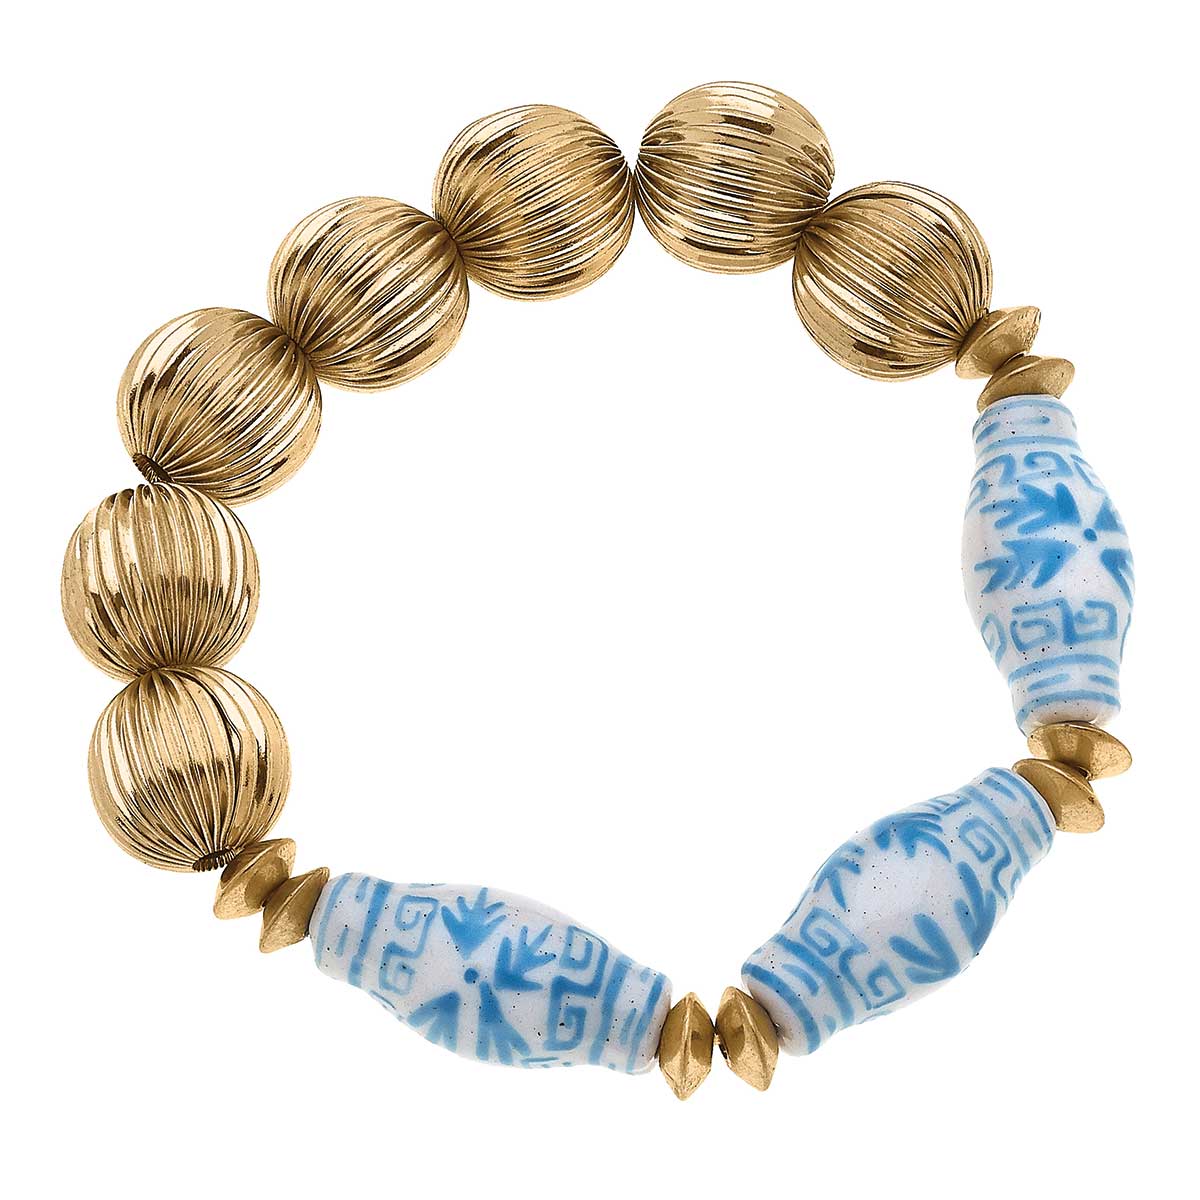 CANVAS Style - Quincy Porcelain & Ribbed Metal Bracelet in Wedgwood Blue